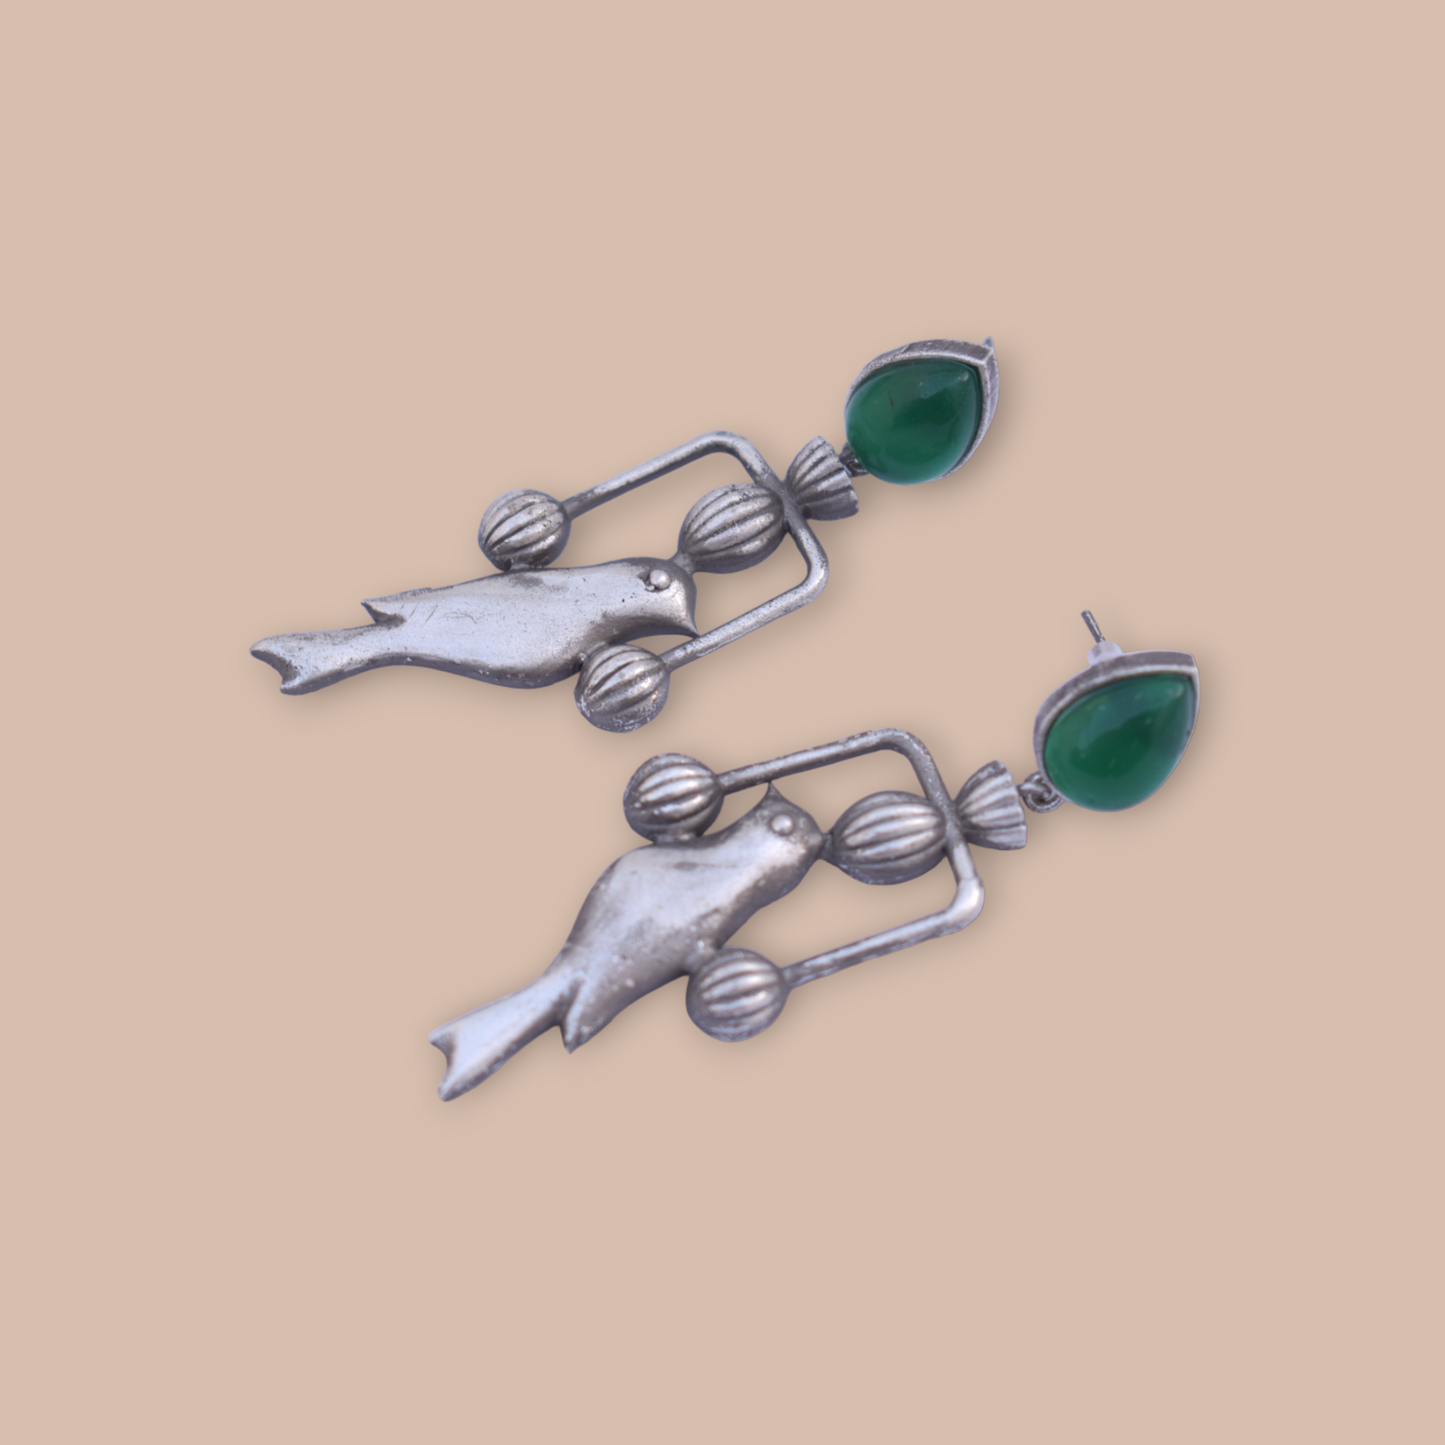 A pair of silver look stone bird earing